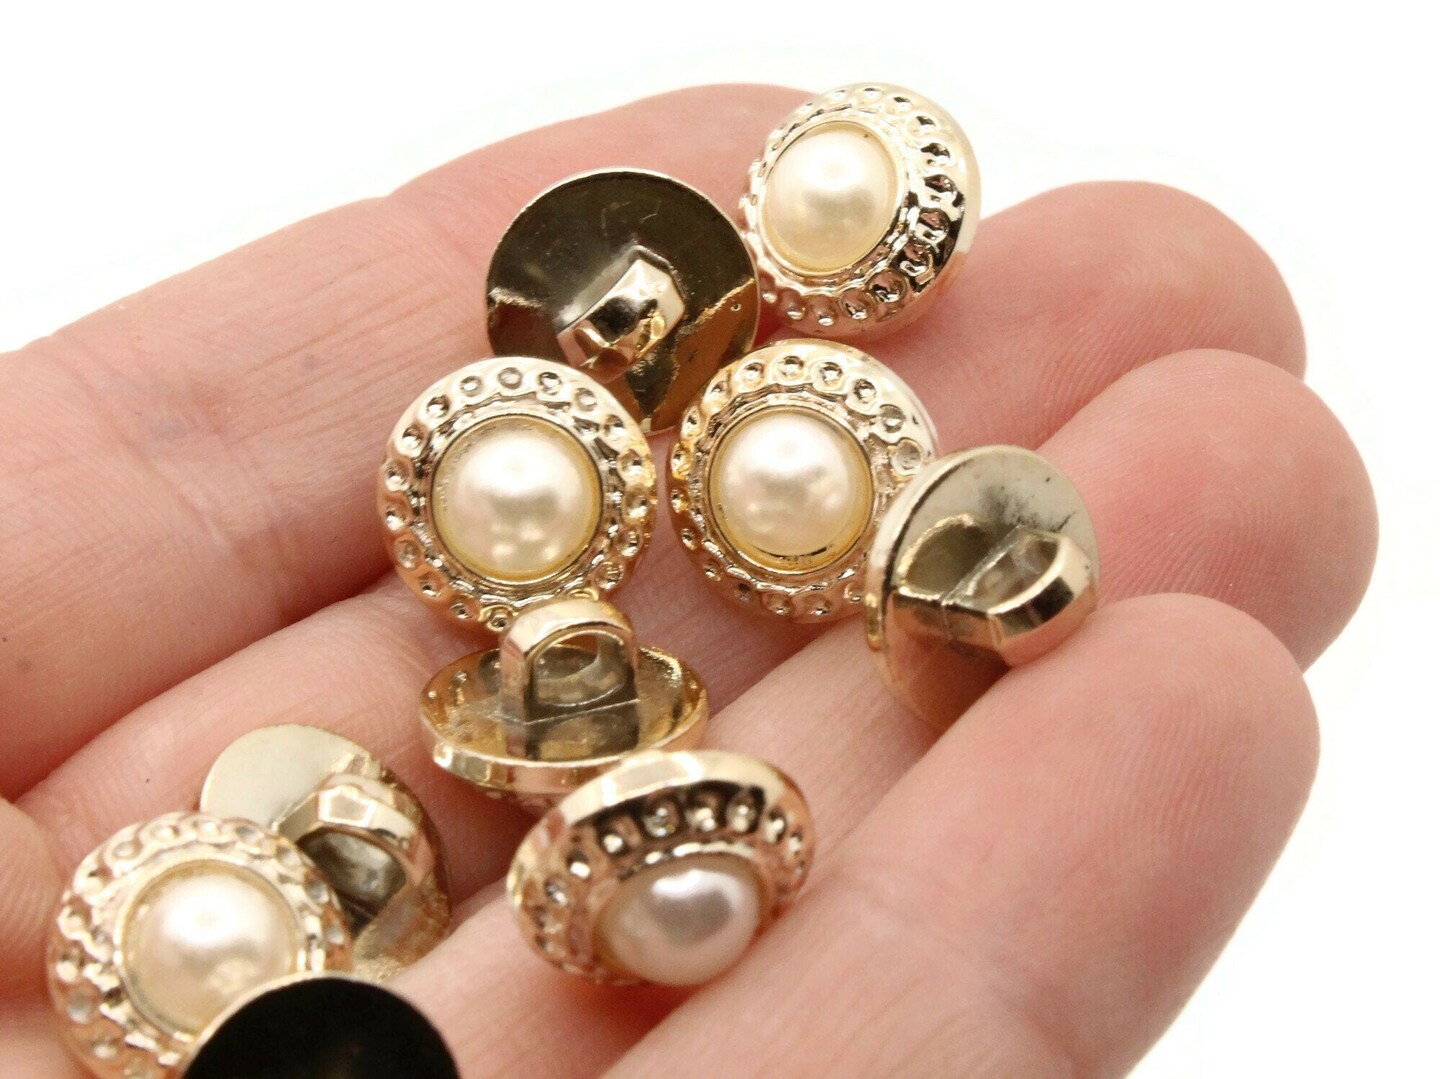 10 12mm Pearl Silver Shank Plastic Buttons